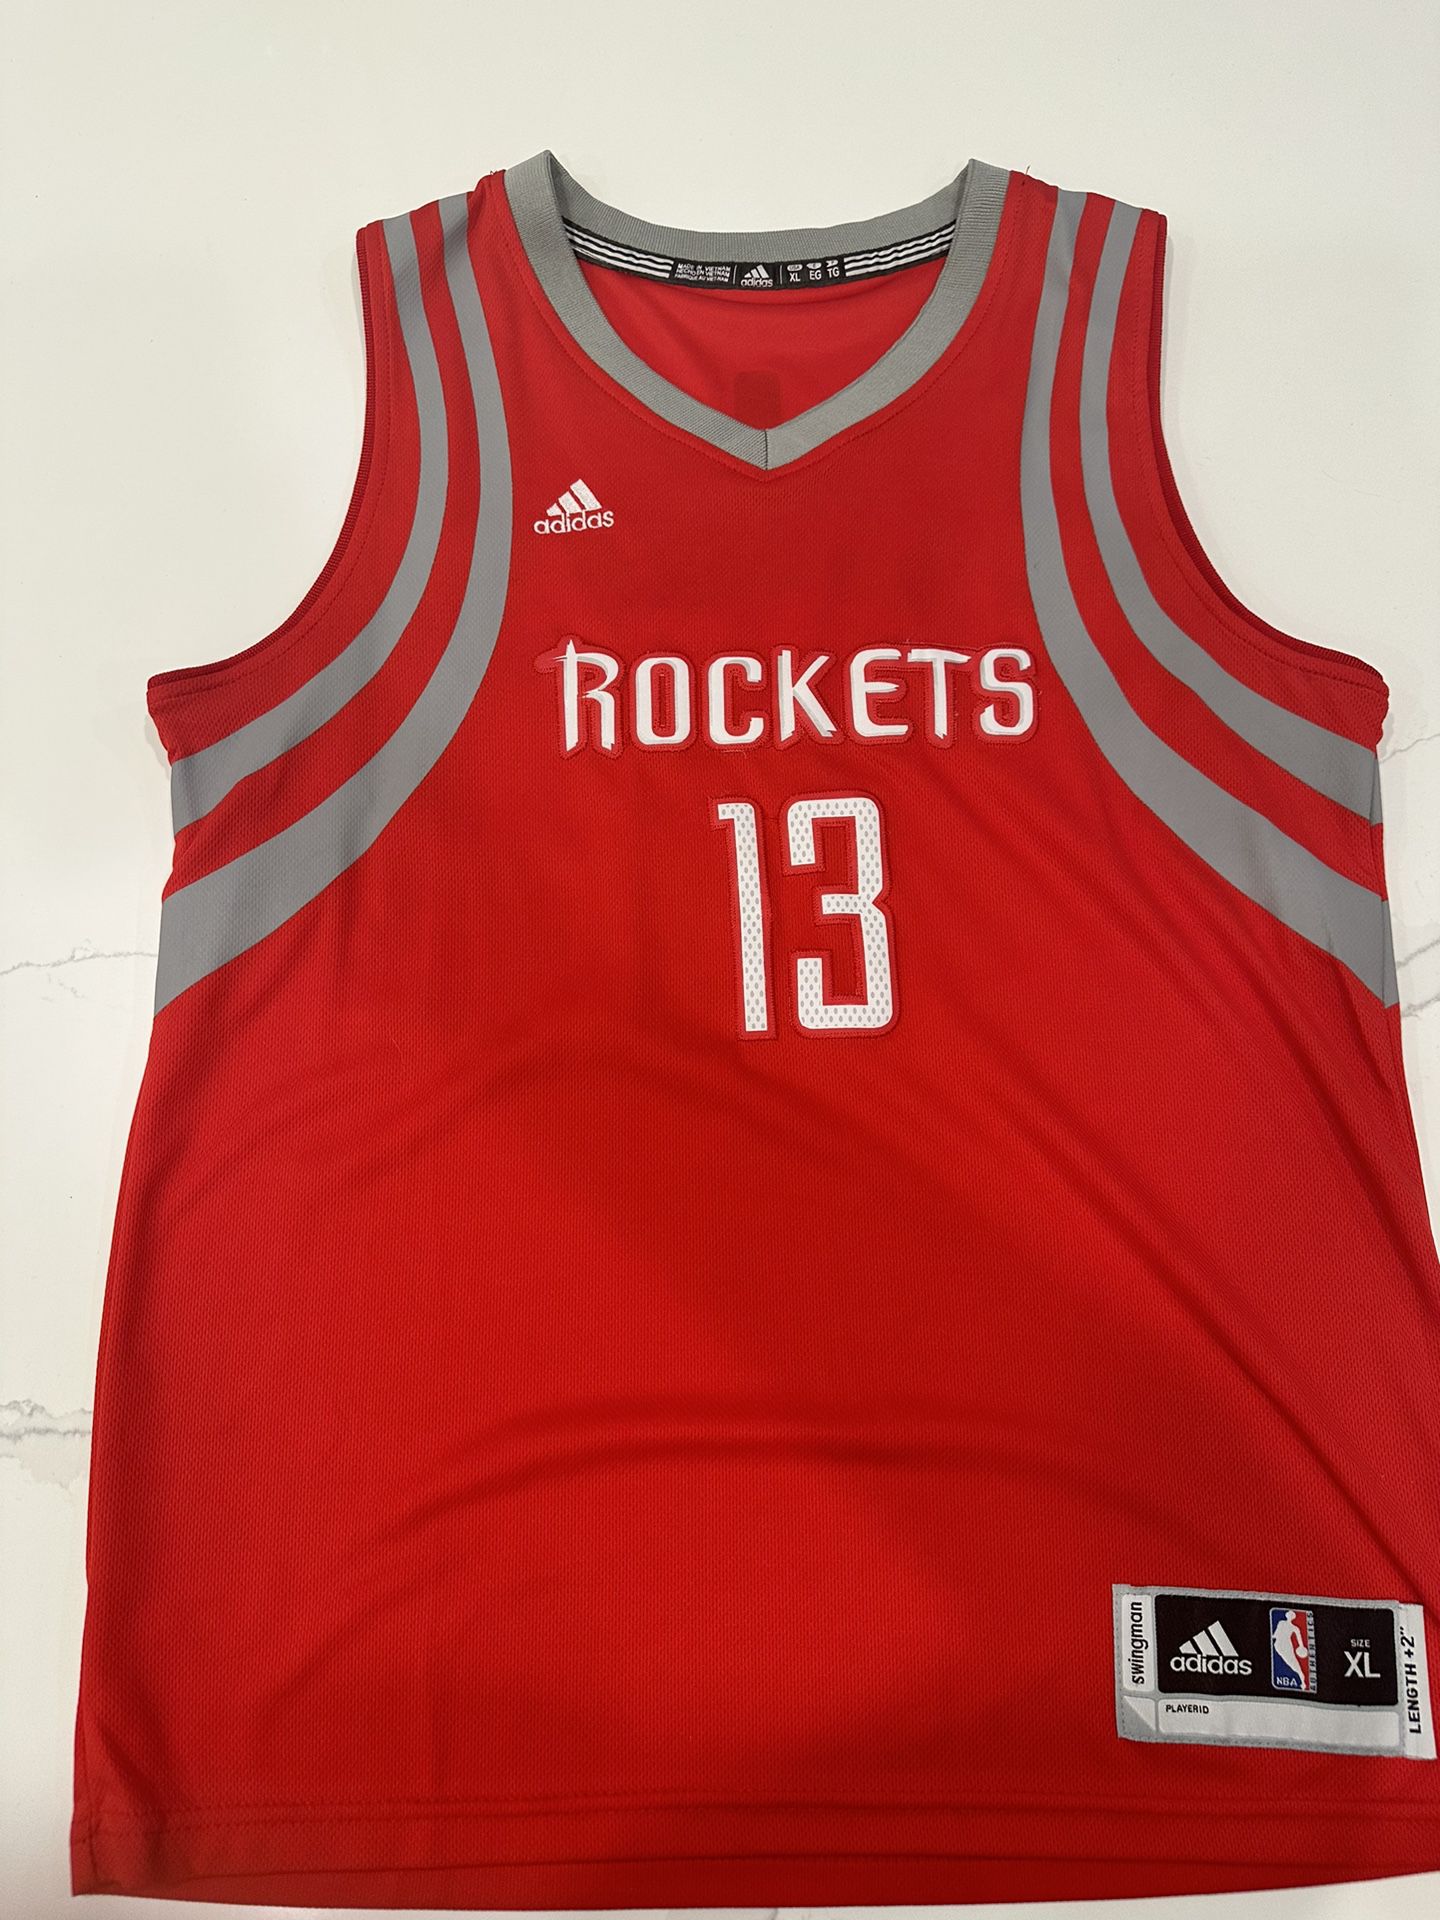 James Harden All Star Jersey for Sale in Lomita, CA - OfferUp